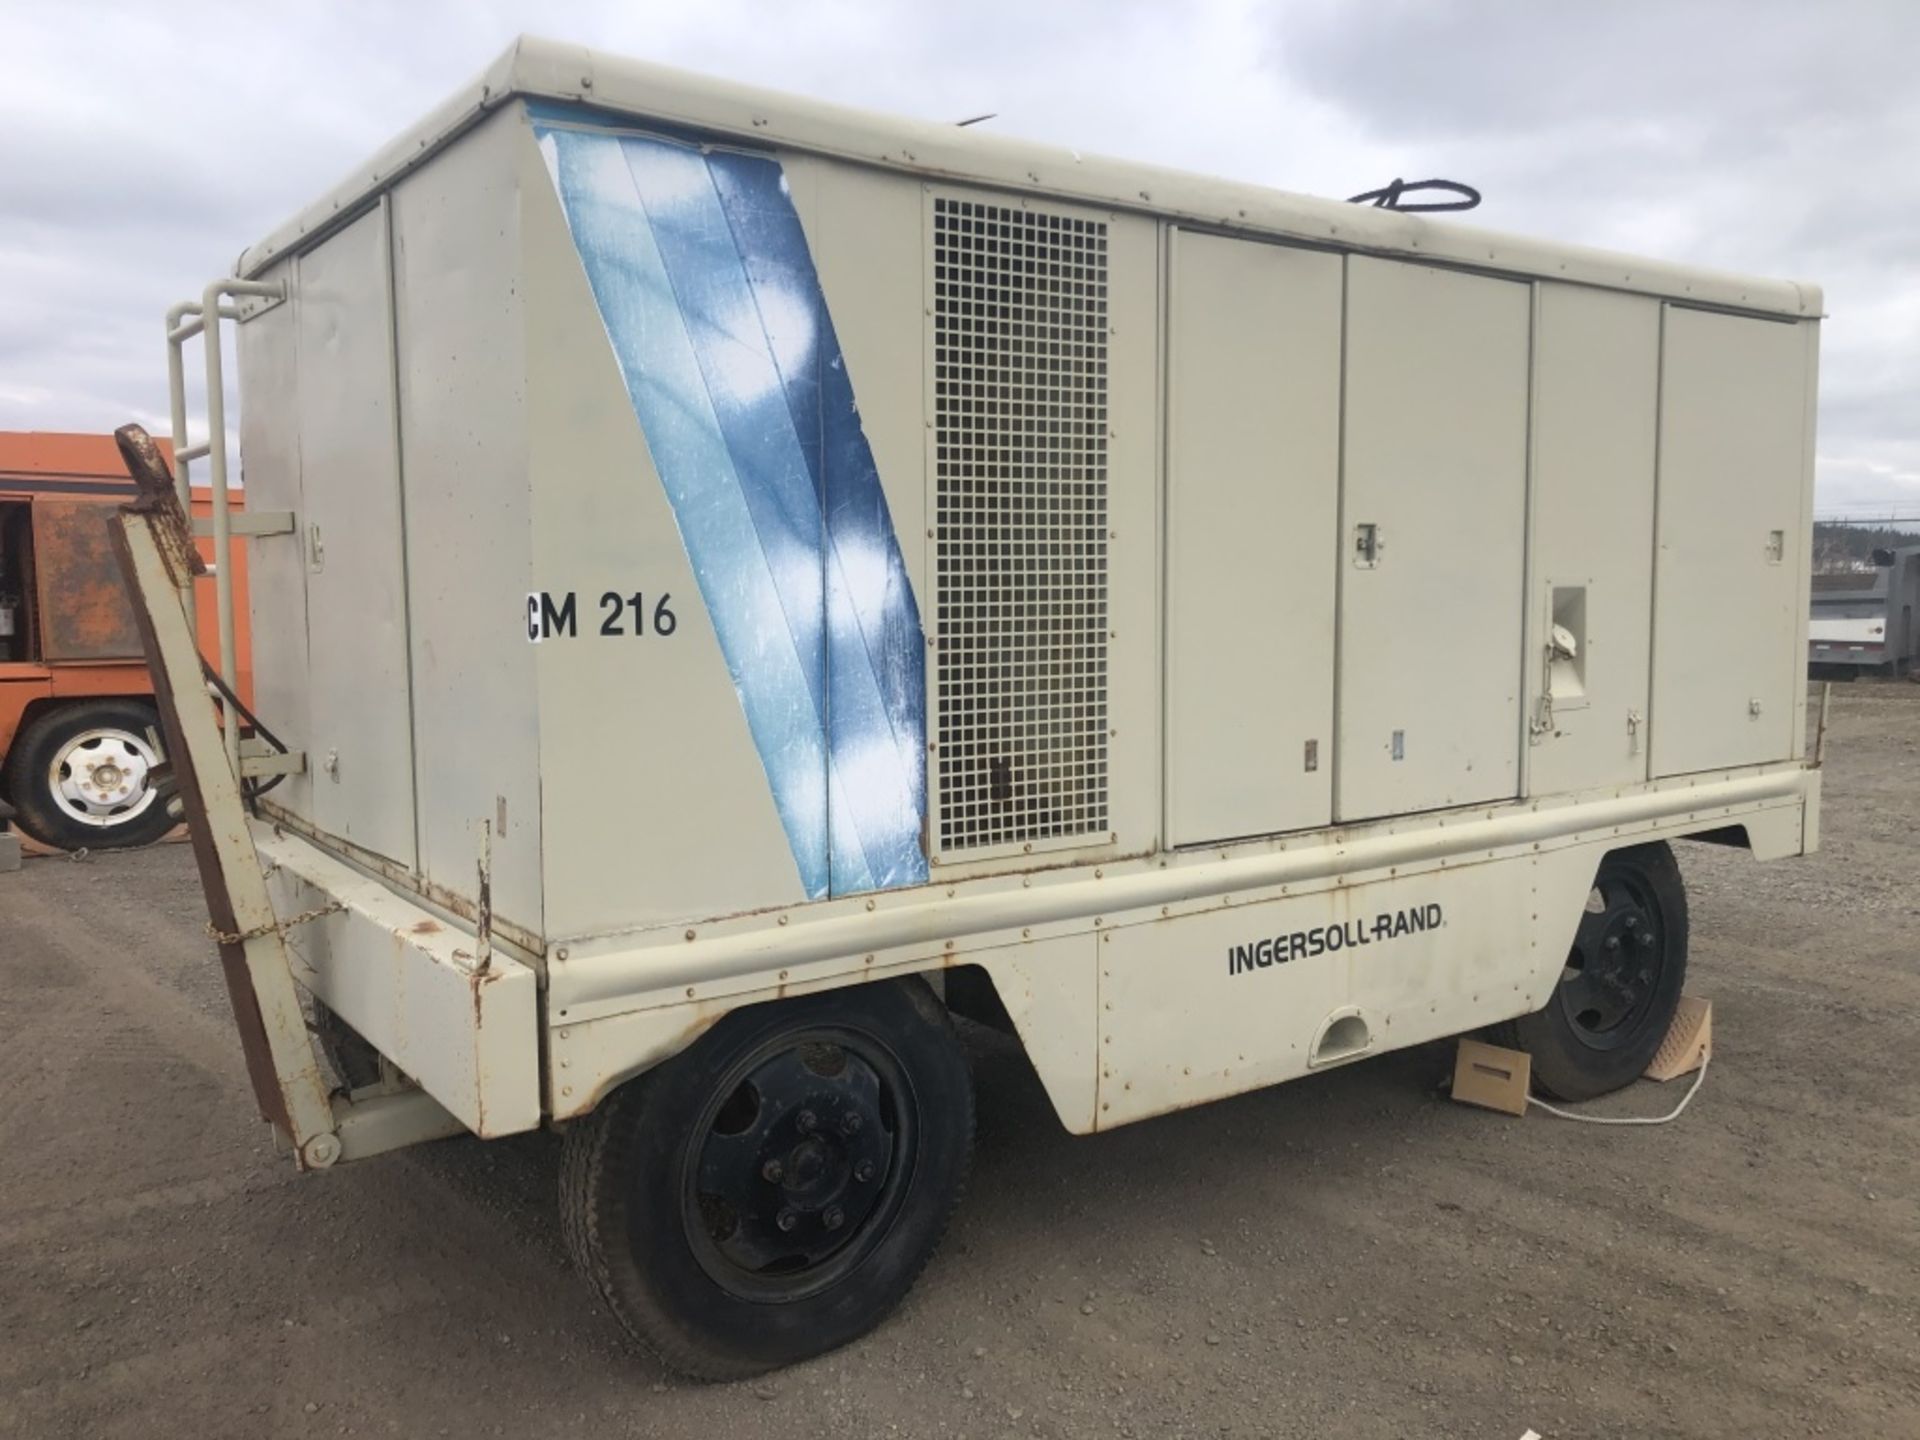 1981 Ingersoll Rand 750 Towable Air Compressor - Image 2 of 26